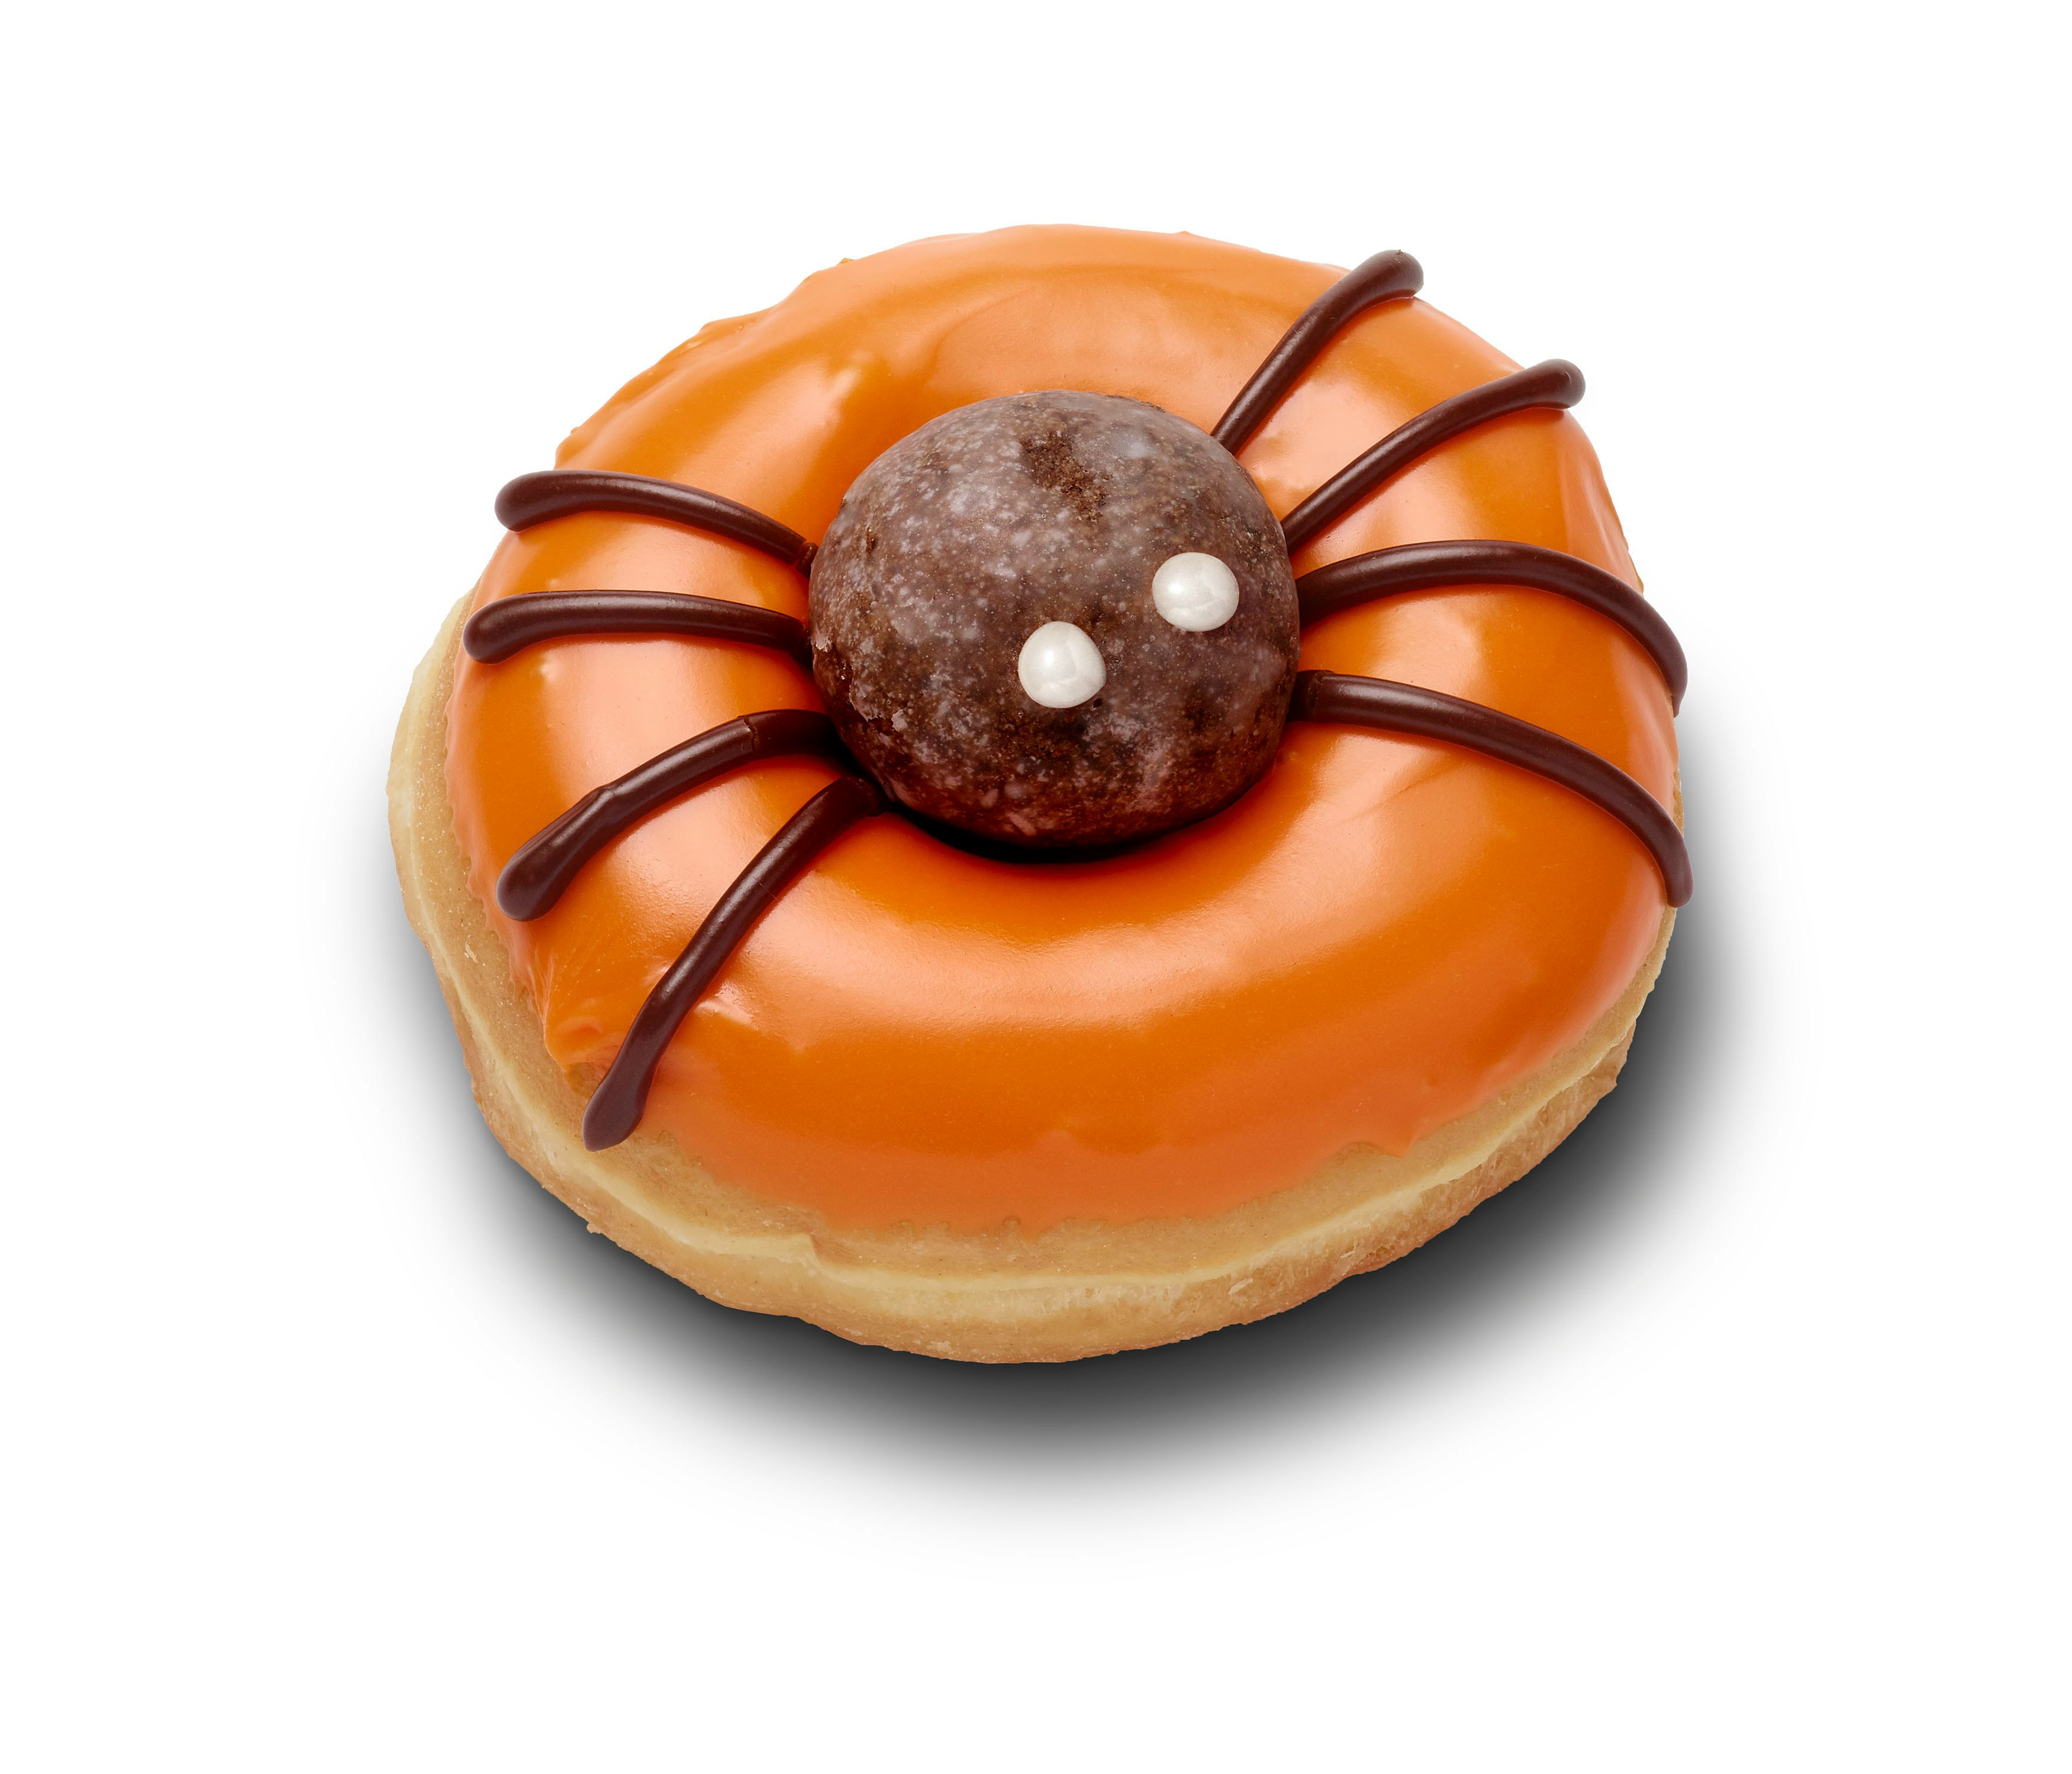 dunkin donuts halloween donuts 2020 The Dunkin Halloween Menu For 2019 Is Spookily Delicious dunkin donuts halloween donuts 2020